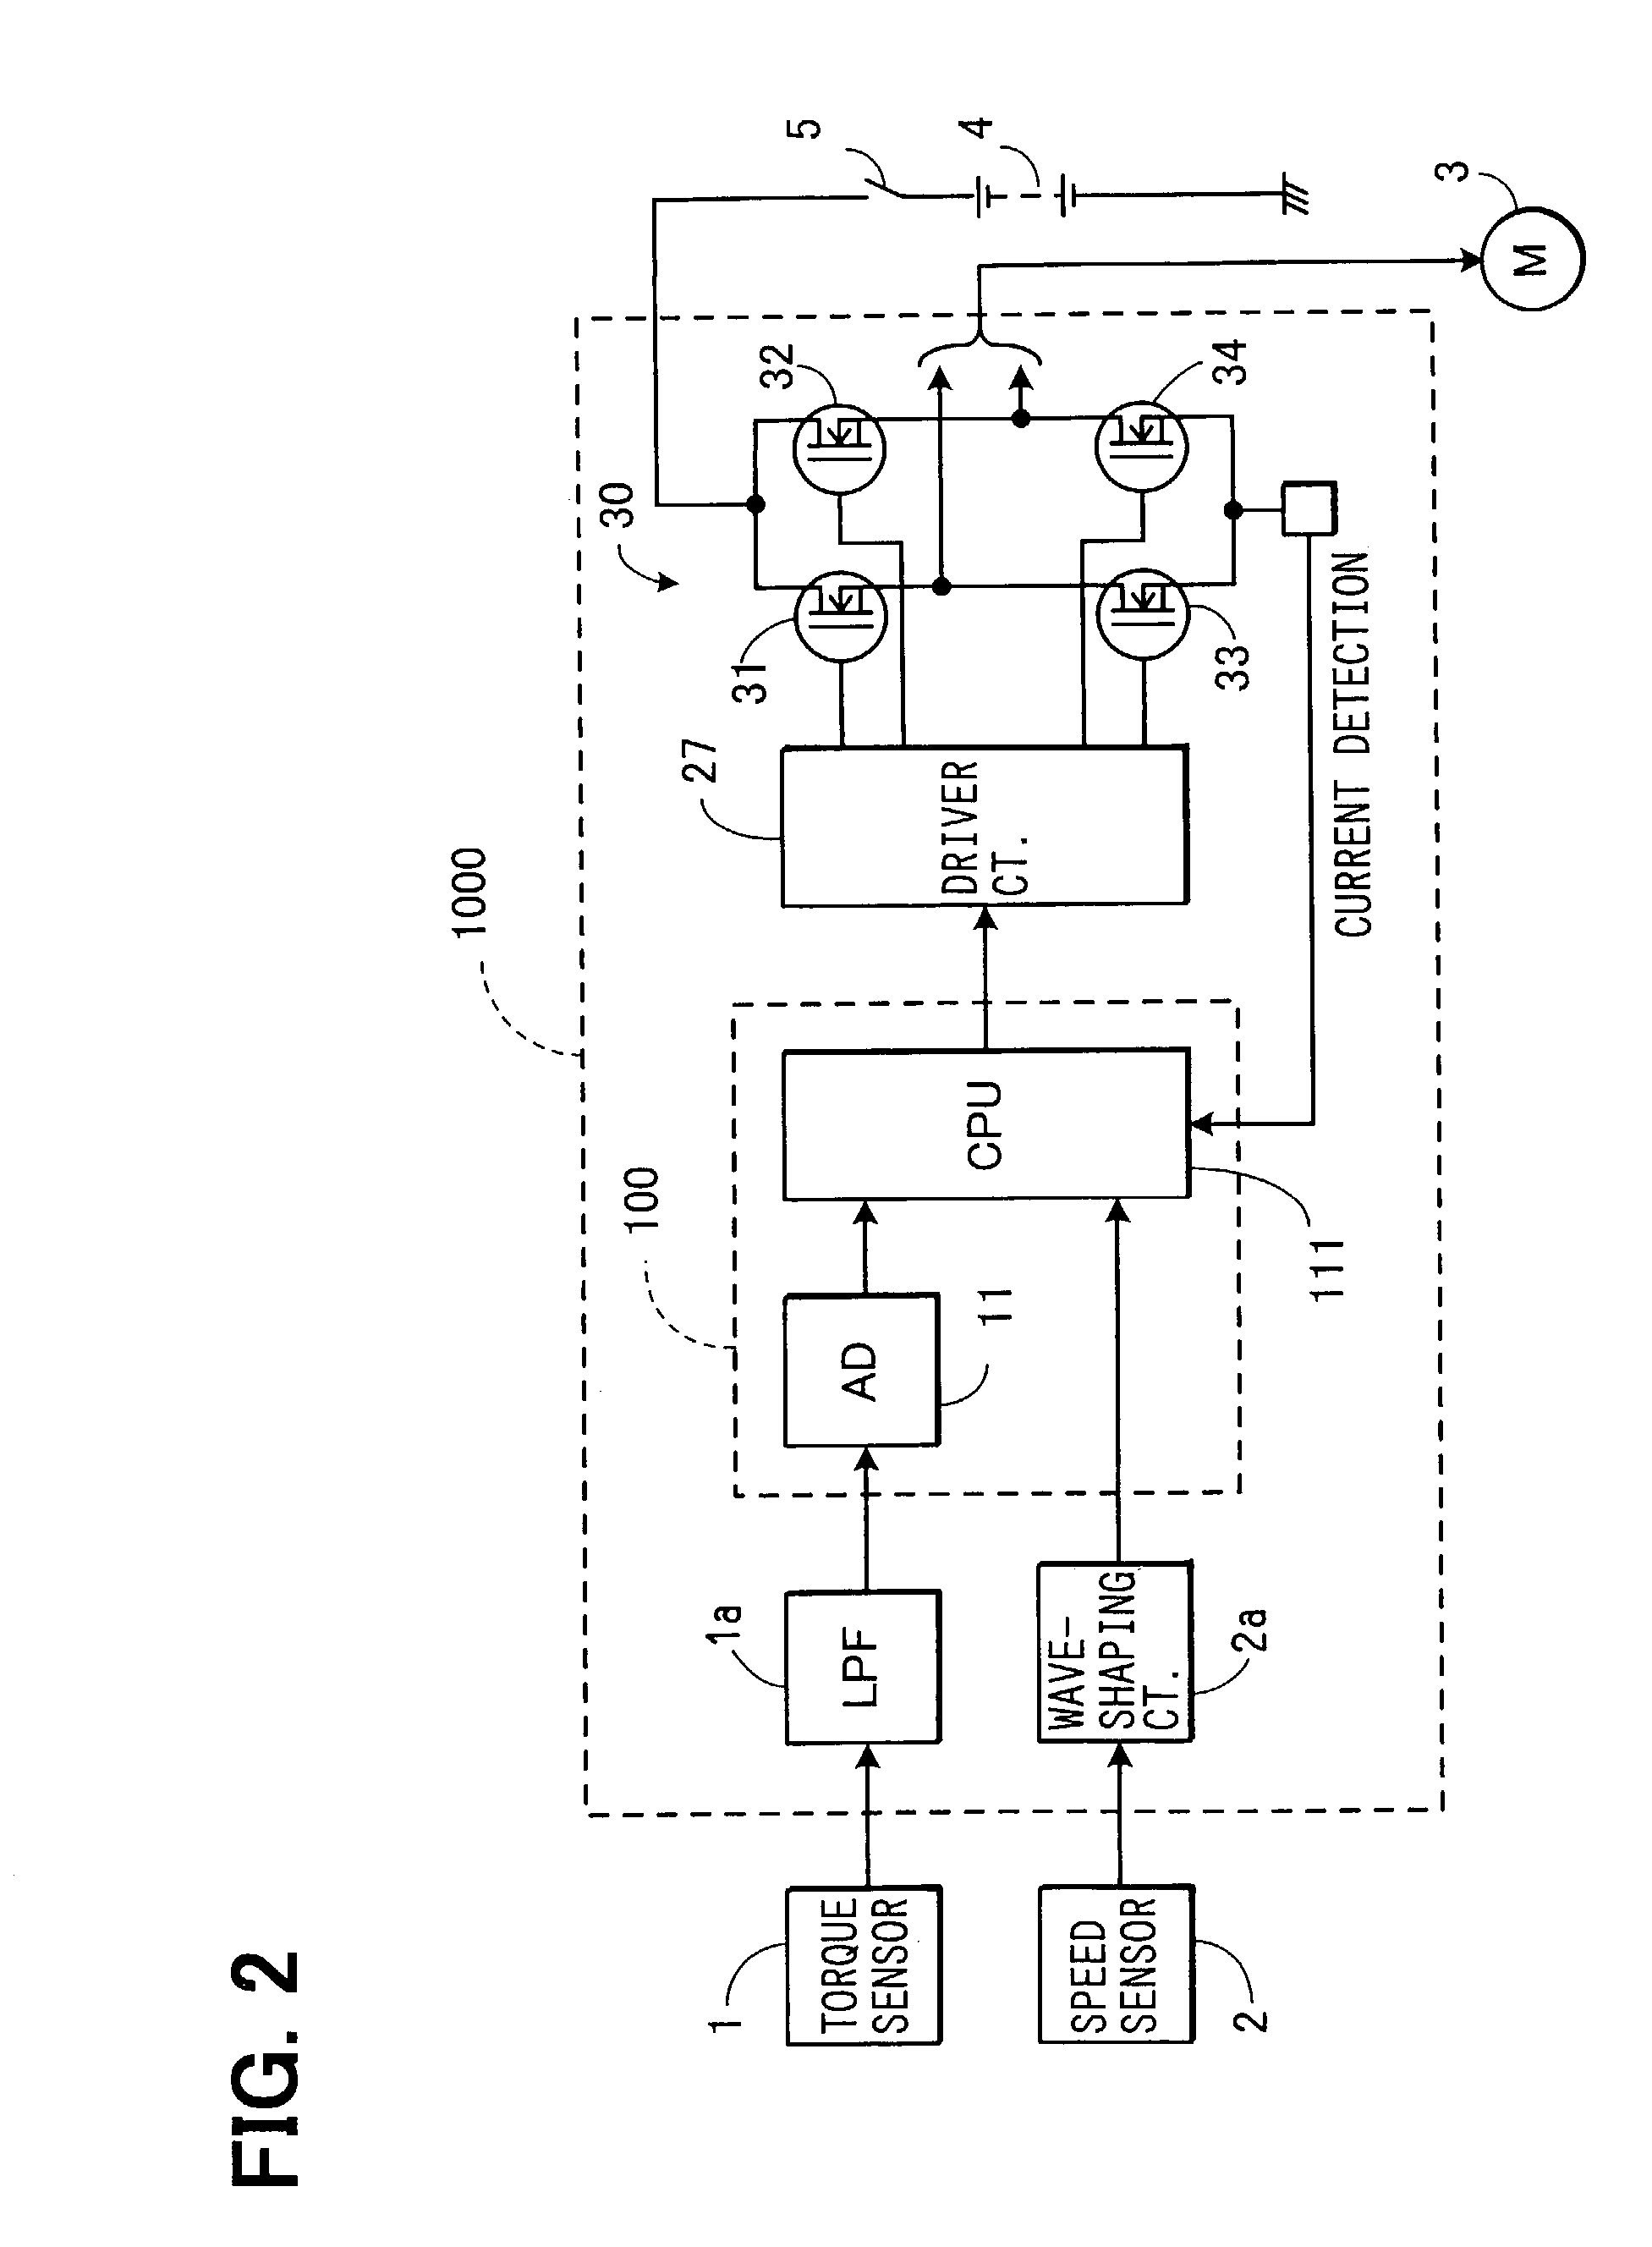 Switching device for controlling large amount of current